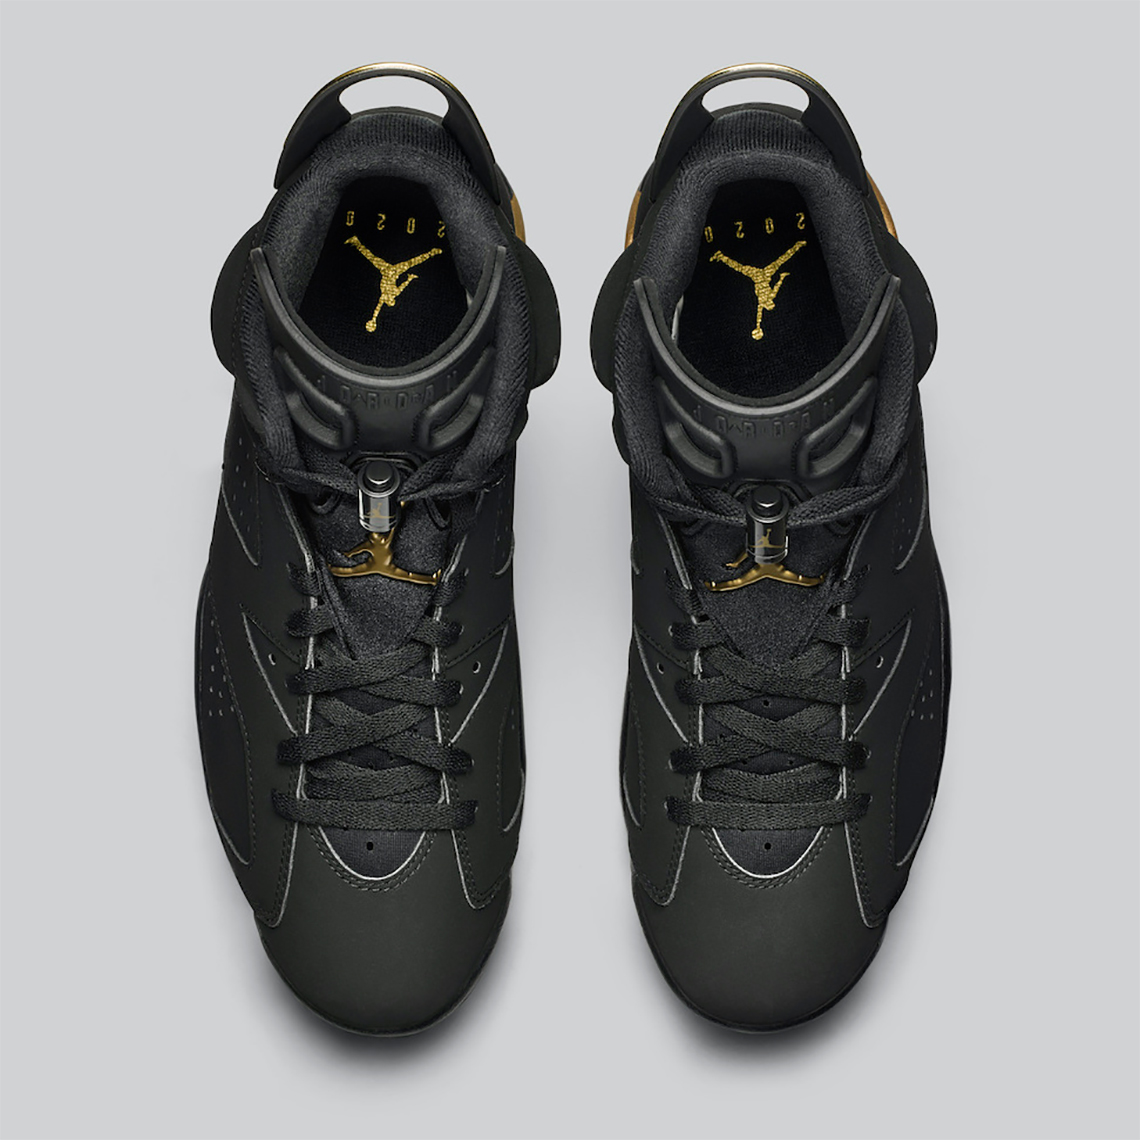 Spike Lee has just received this Air Jordan 6 "Oscars Edition" player Dmp Ct4954 007 8